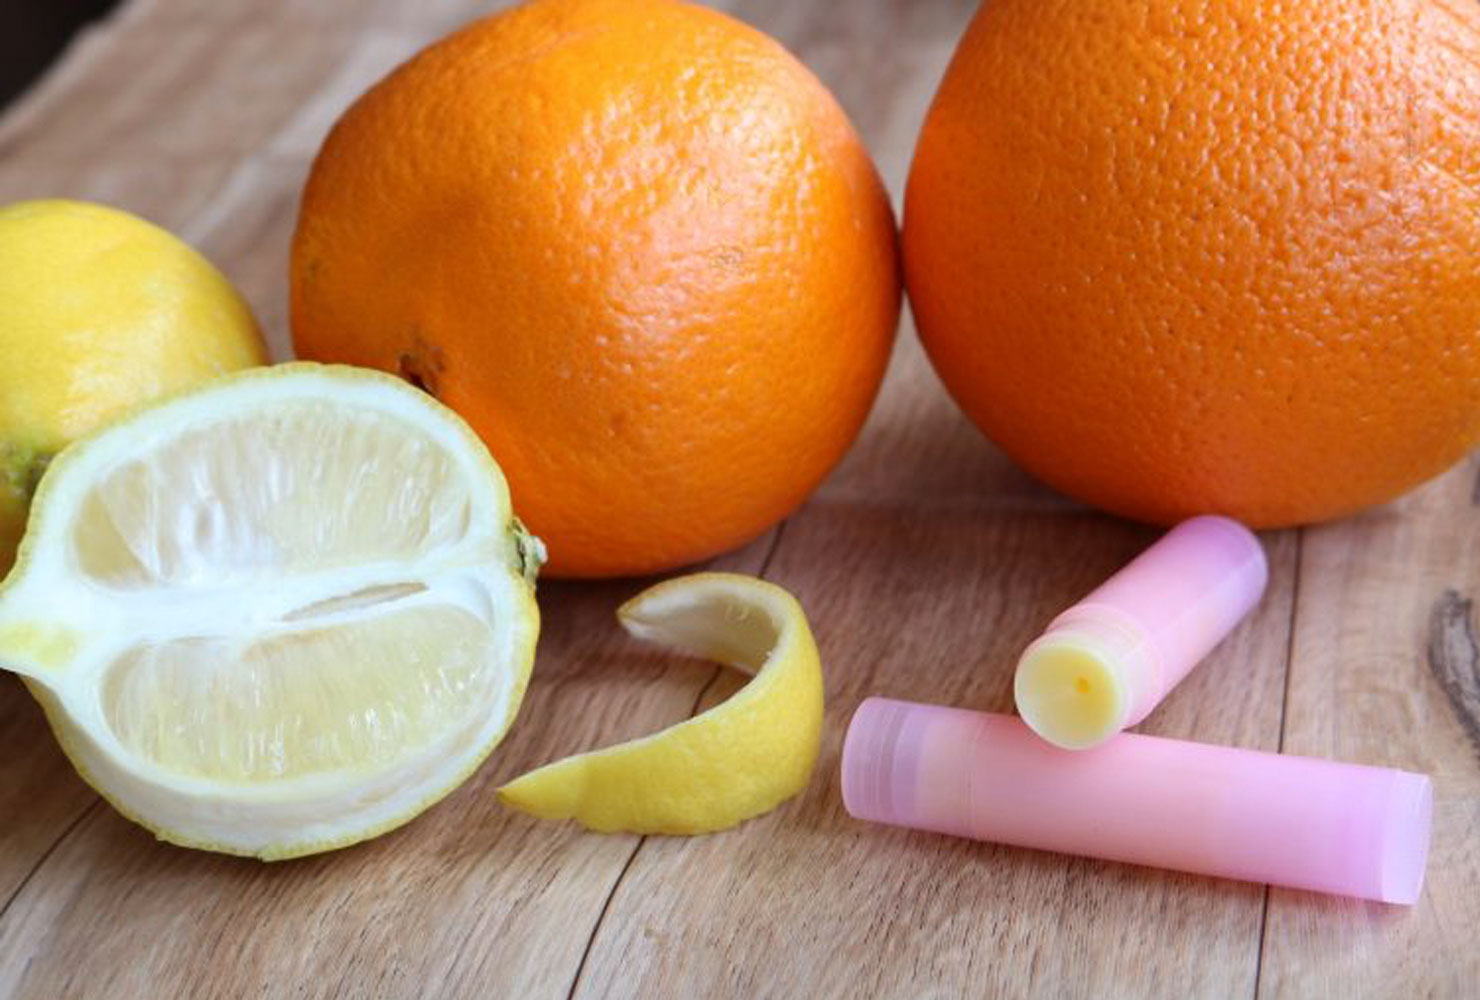 Oranges and lemons with pink lip balm tubes